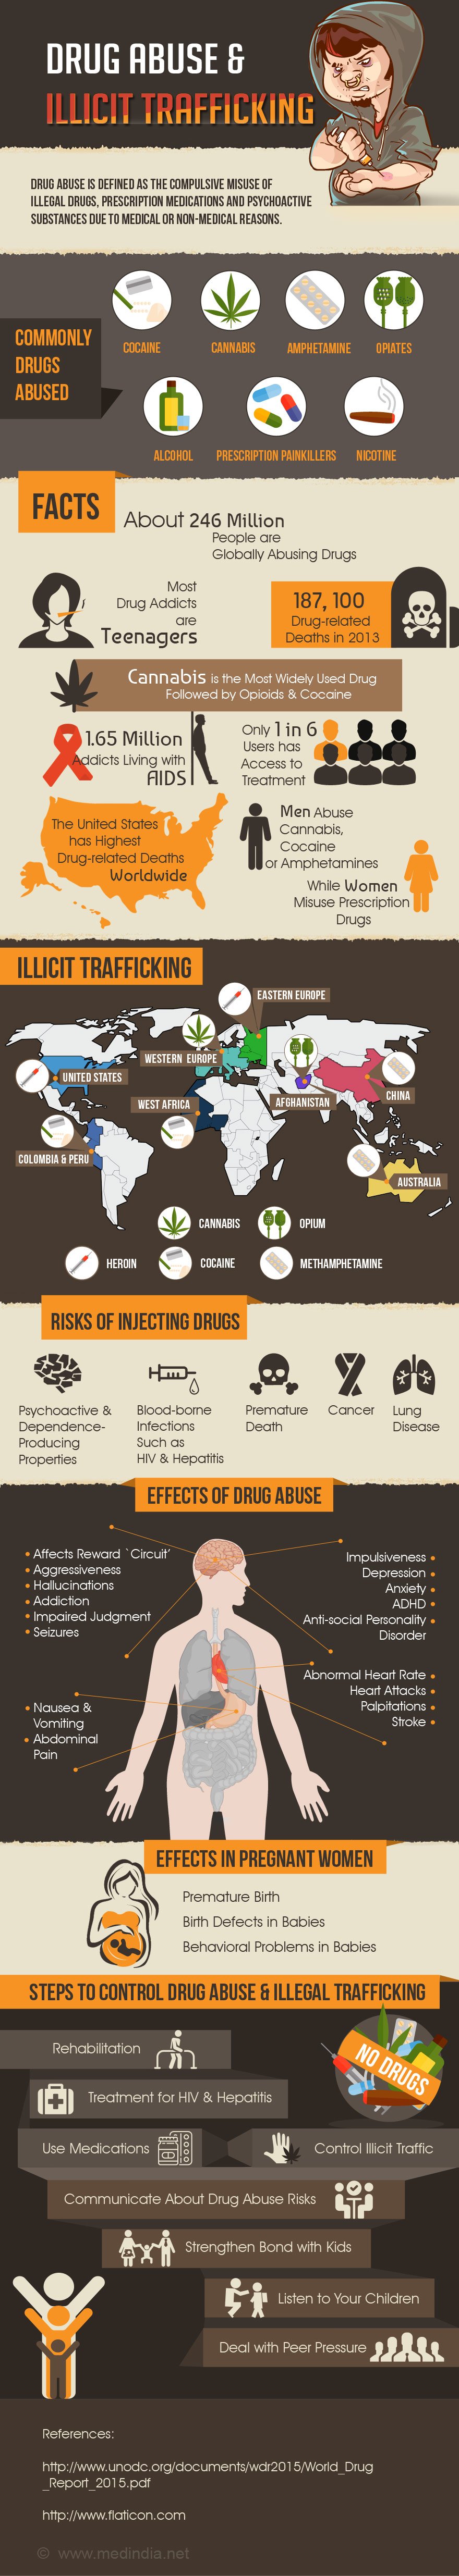 Drug Abuse and Illicit Trafficking - Infographic